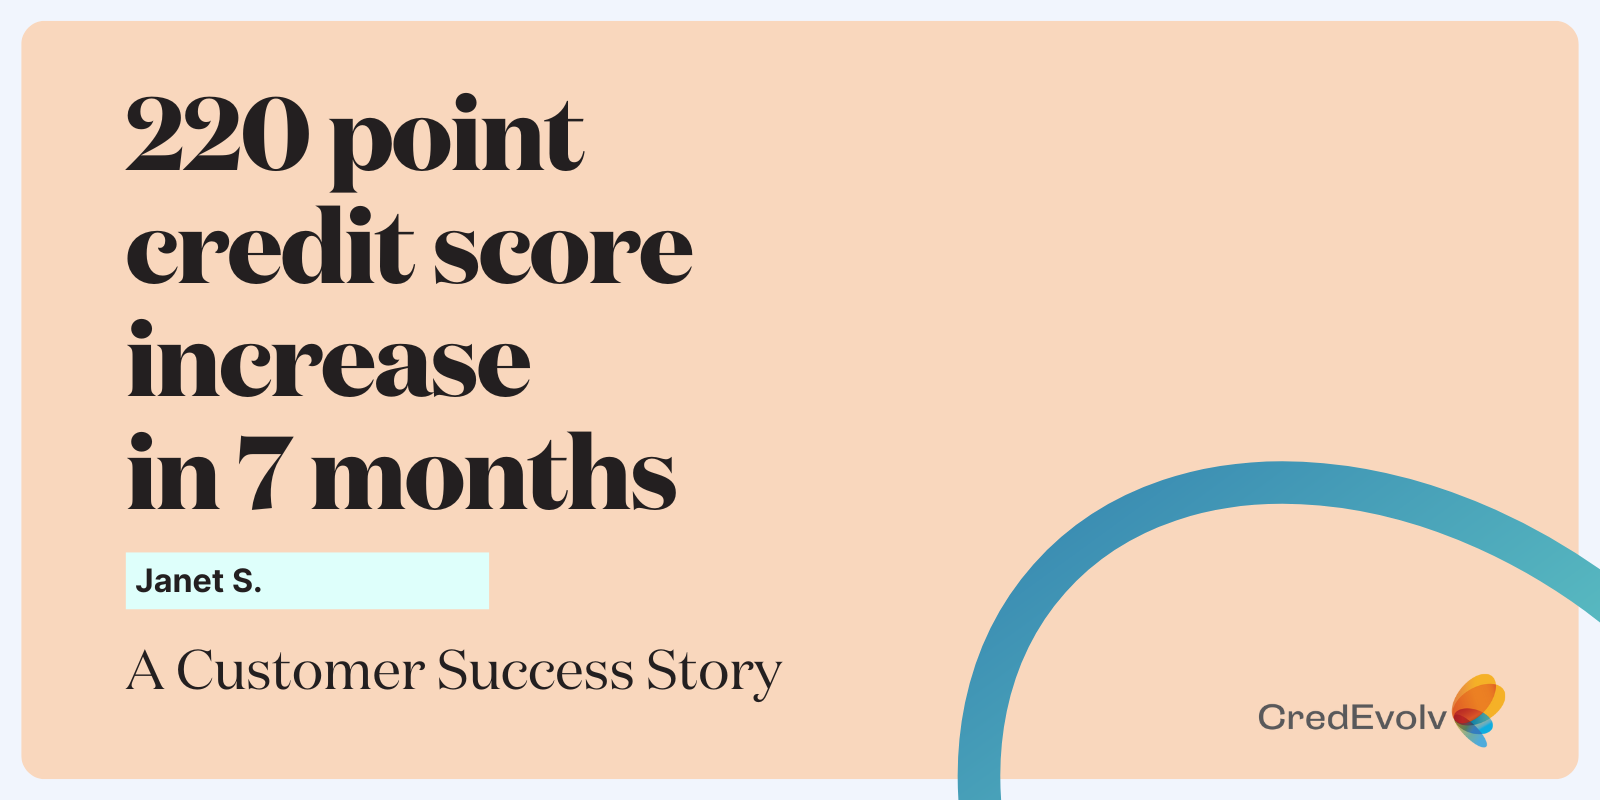 Credit Success Story - 220 point credit score increase in 7 months - blog graphic